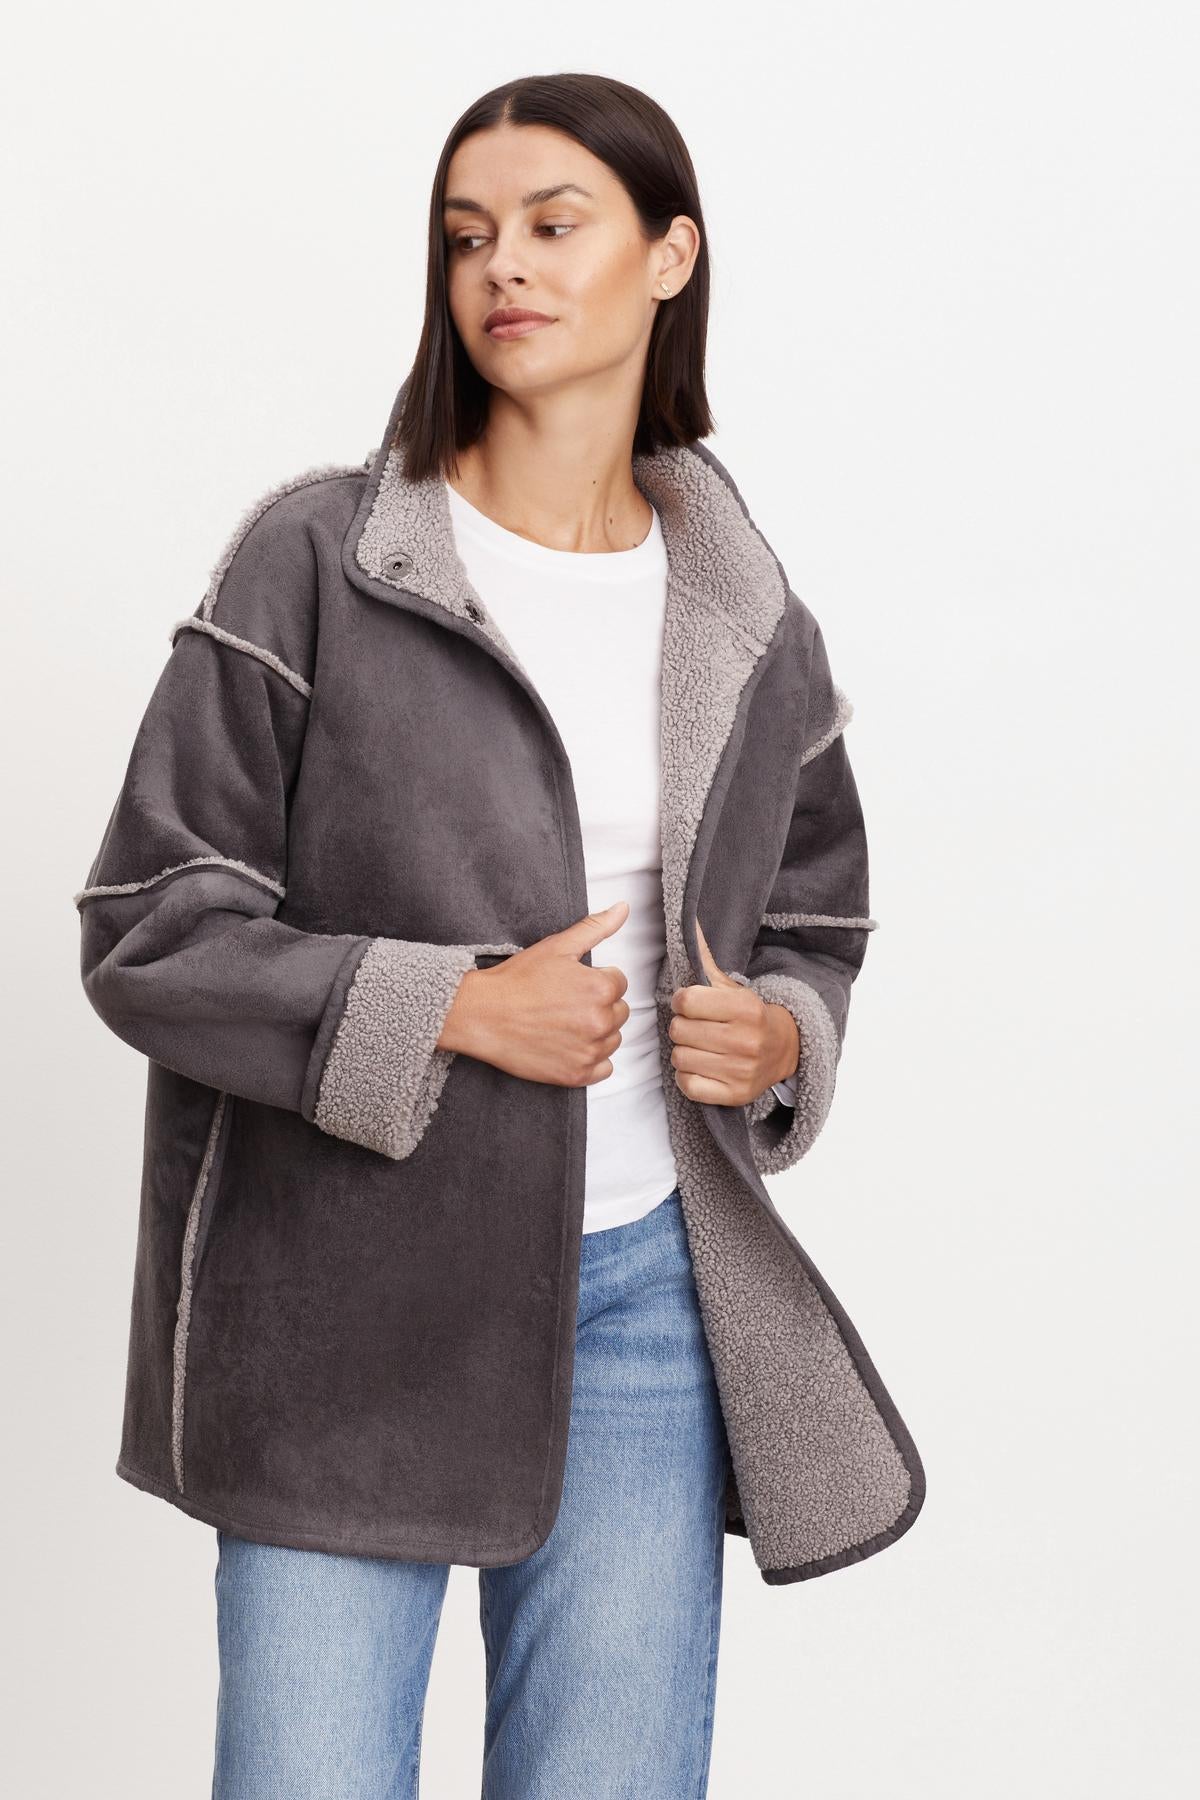 A person wearing a gray ALBANY LUX SHERPA REVERSIBLE JACKET by Velvet by Graham & Spencer over a white shirt and blue jeans stands against a plain background.-36094290919617